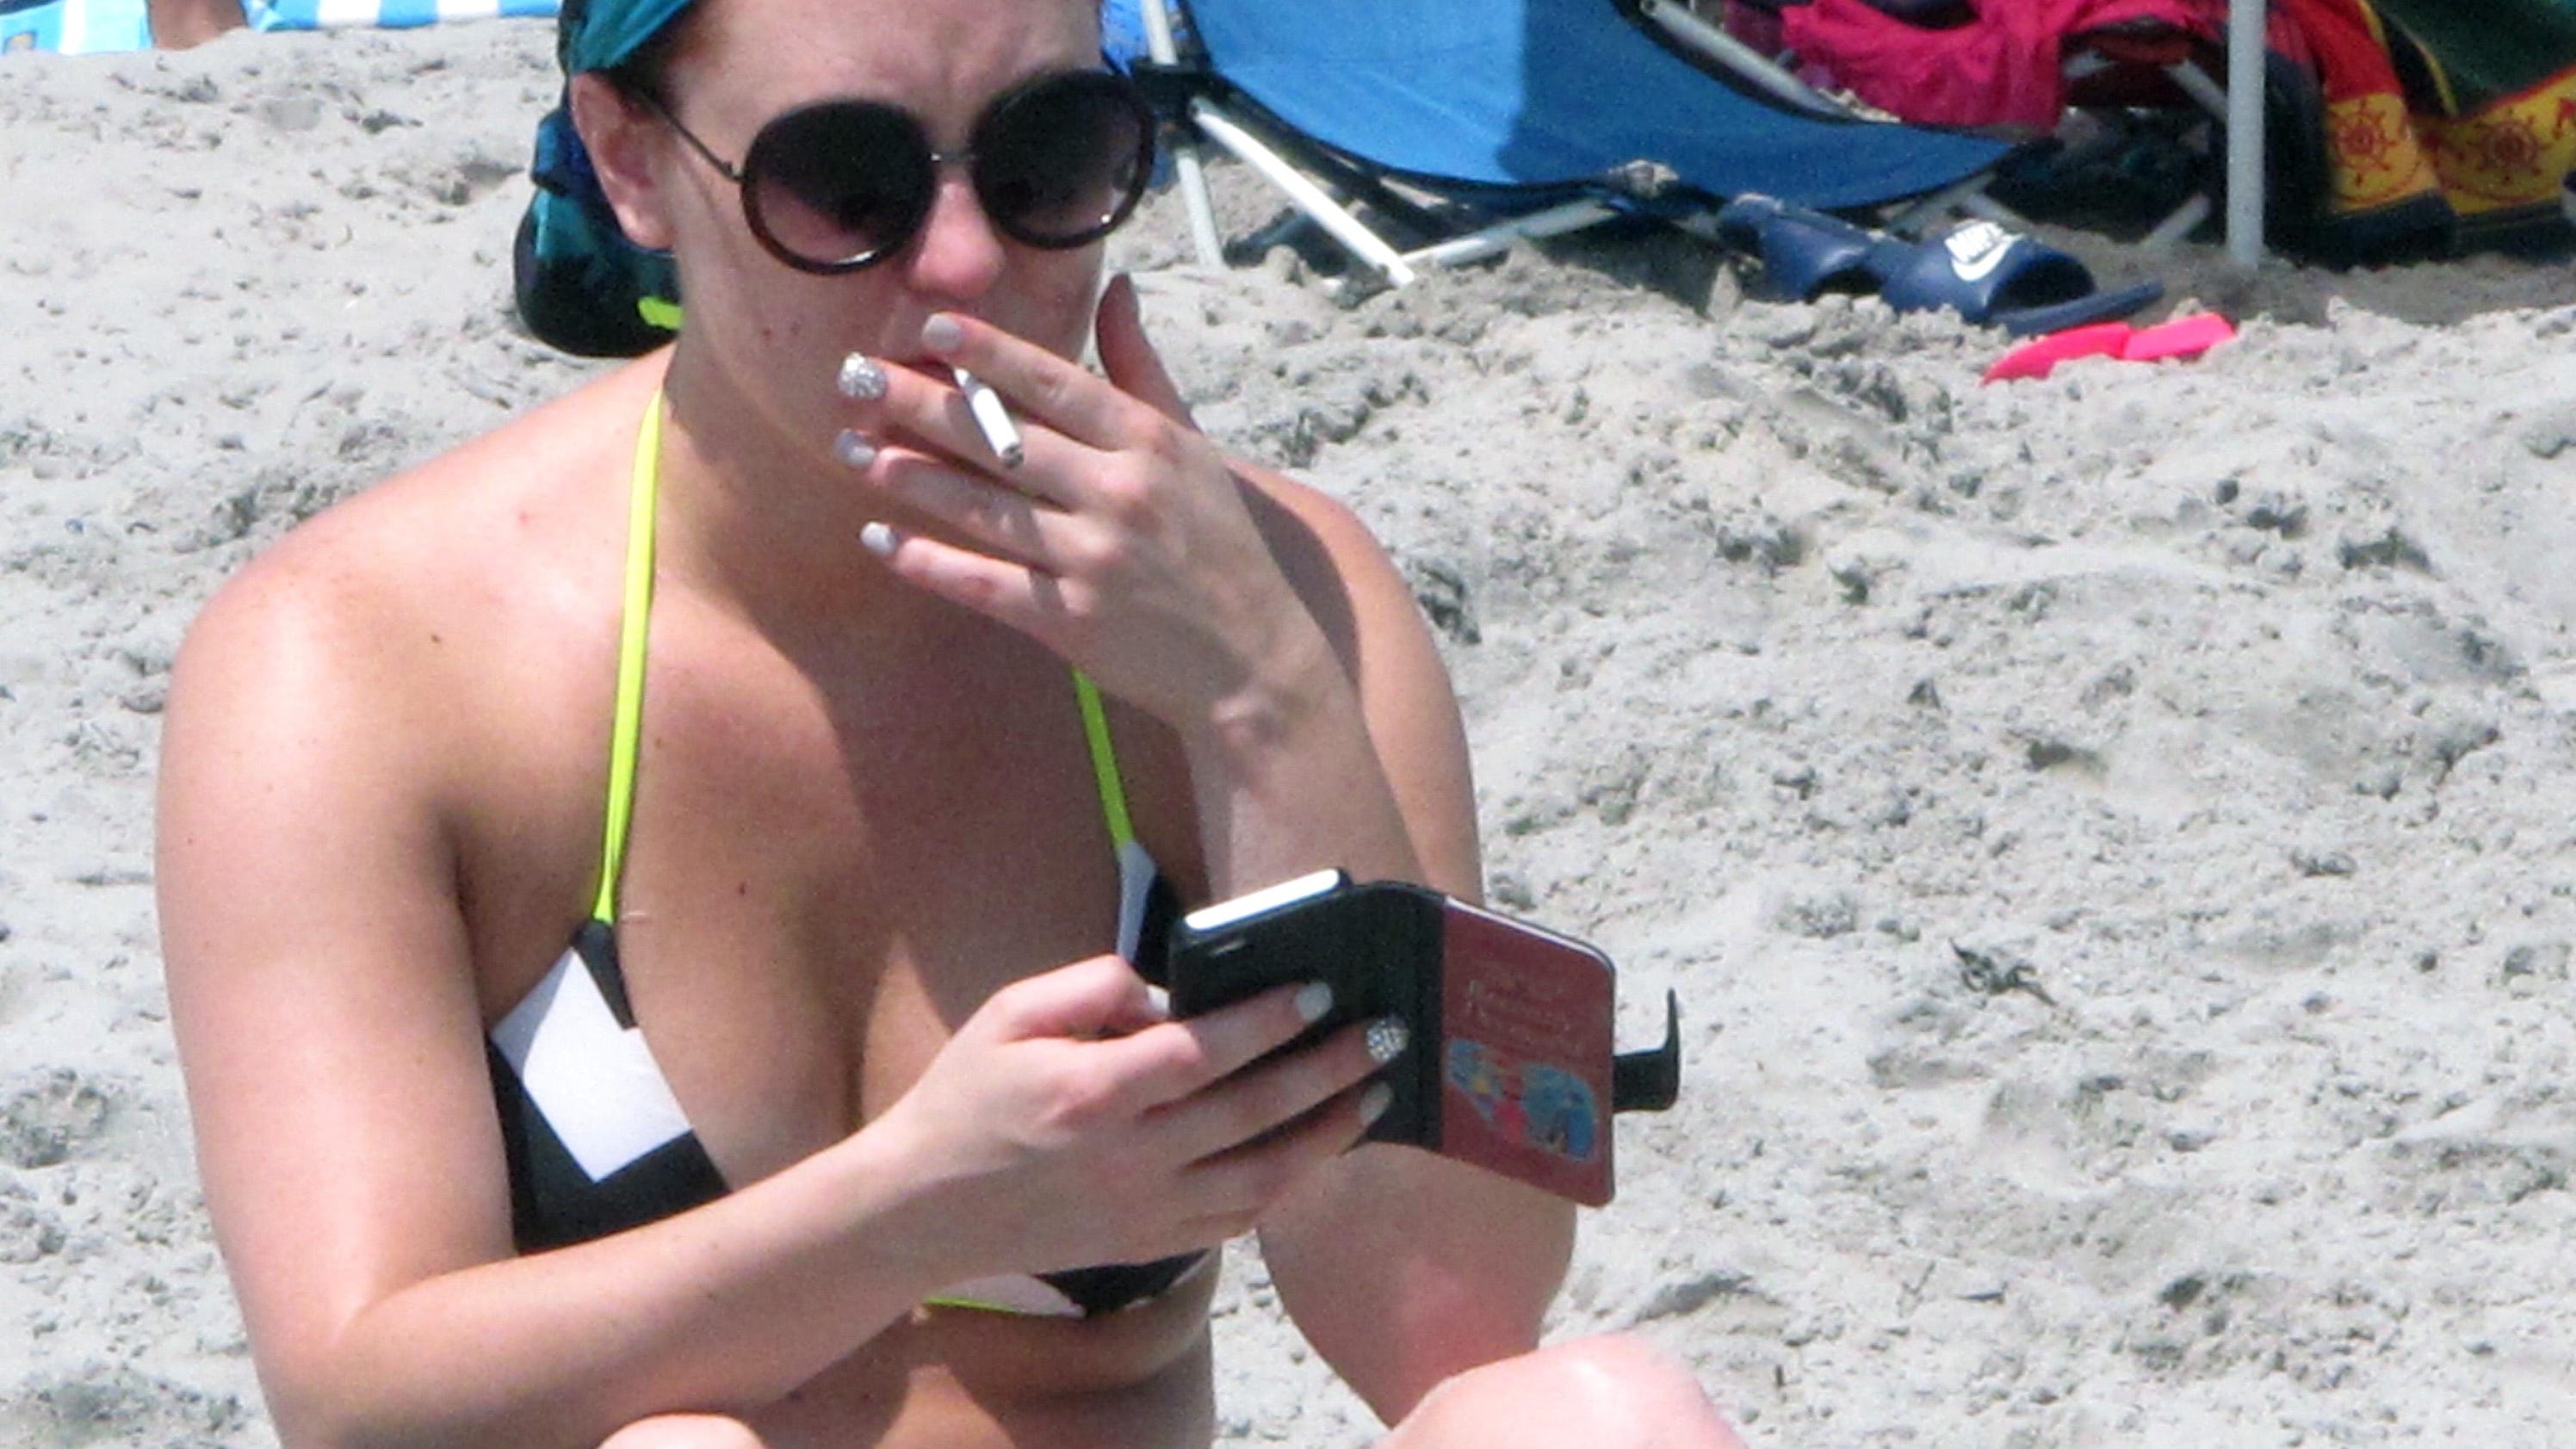 New Jersey may ban smoking on all beaches